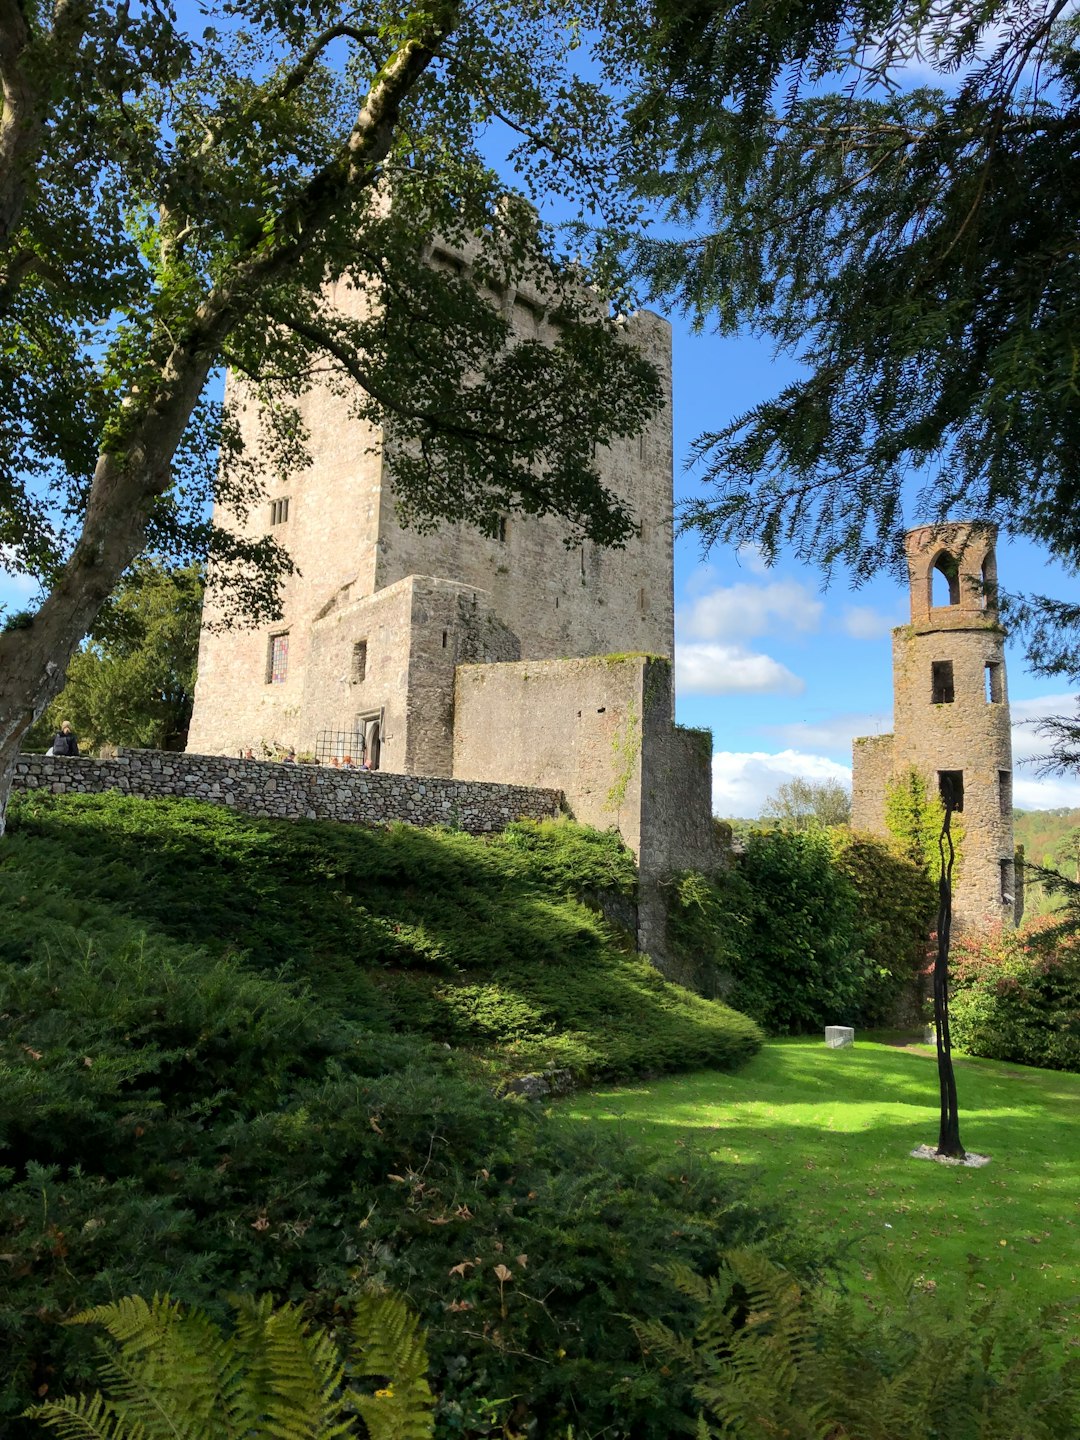 Travel Tips and Stories of Blarney in Ireland